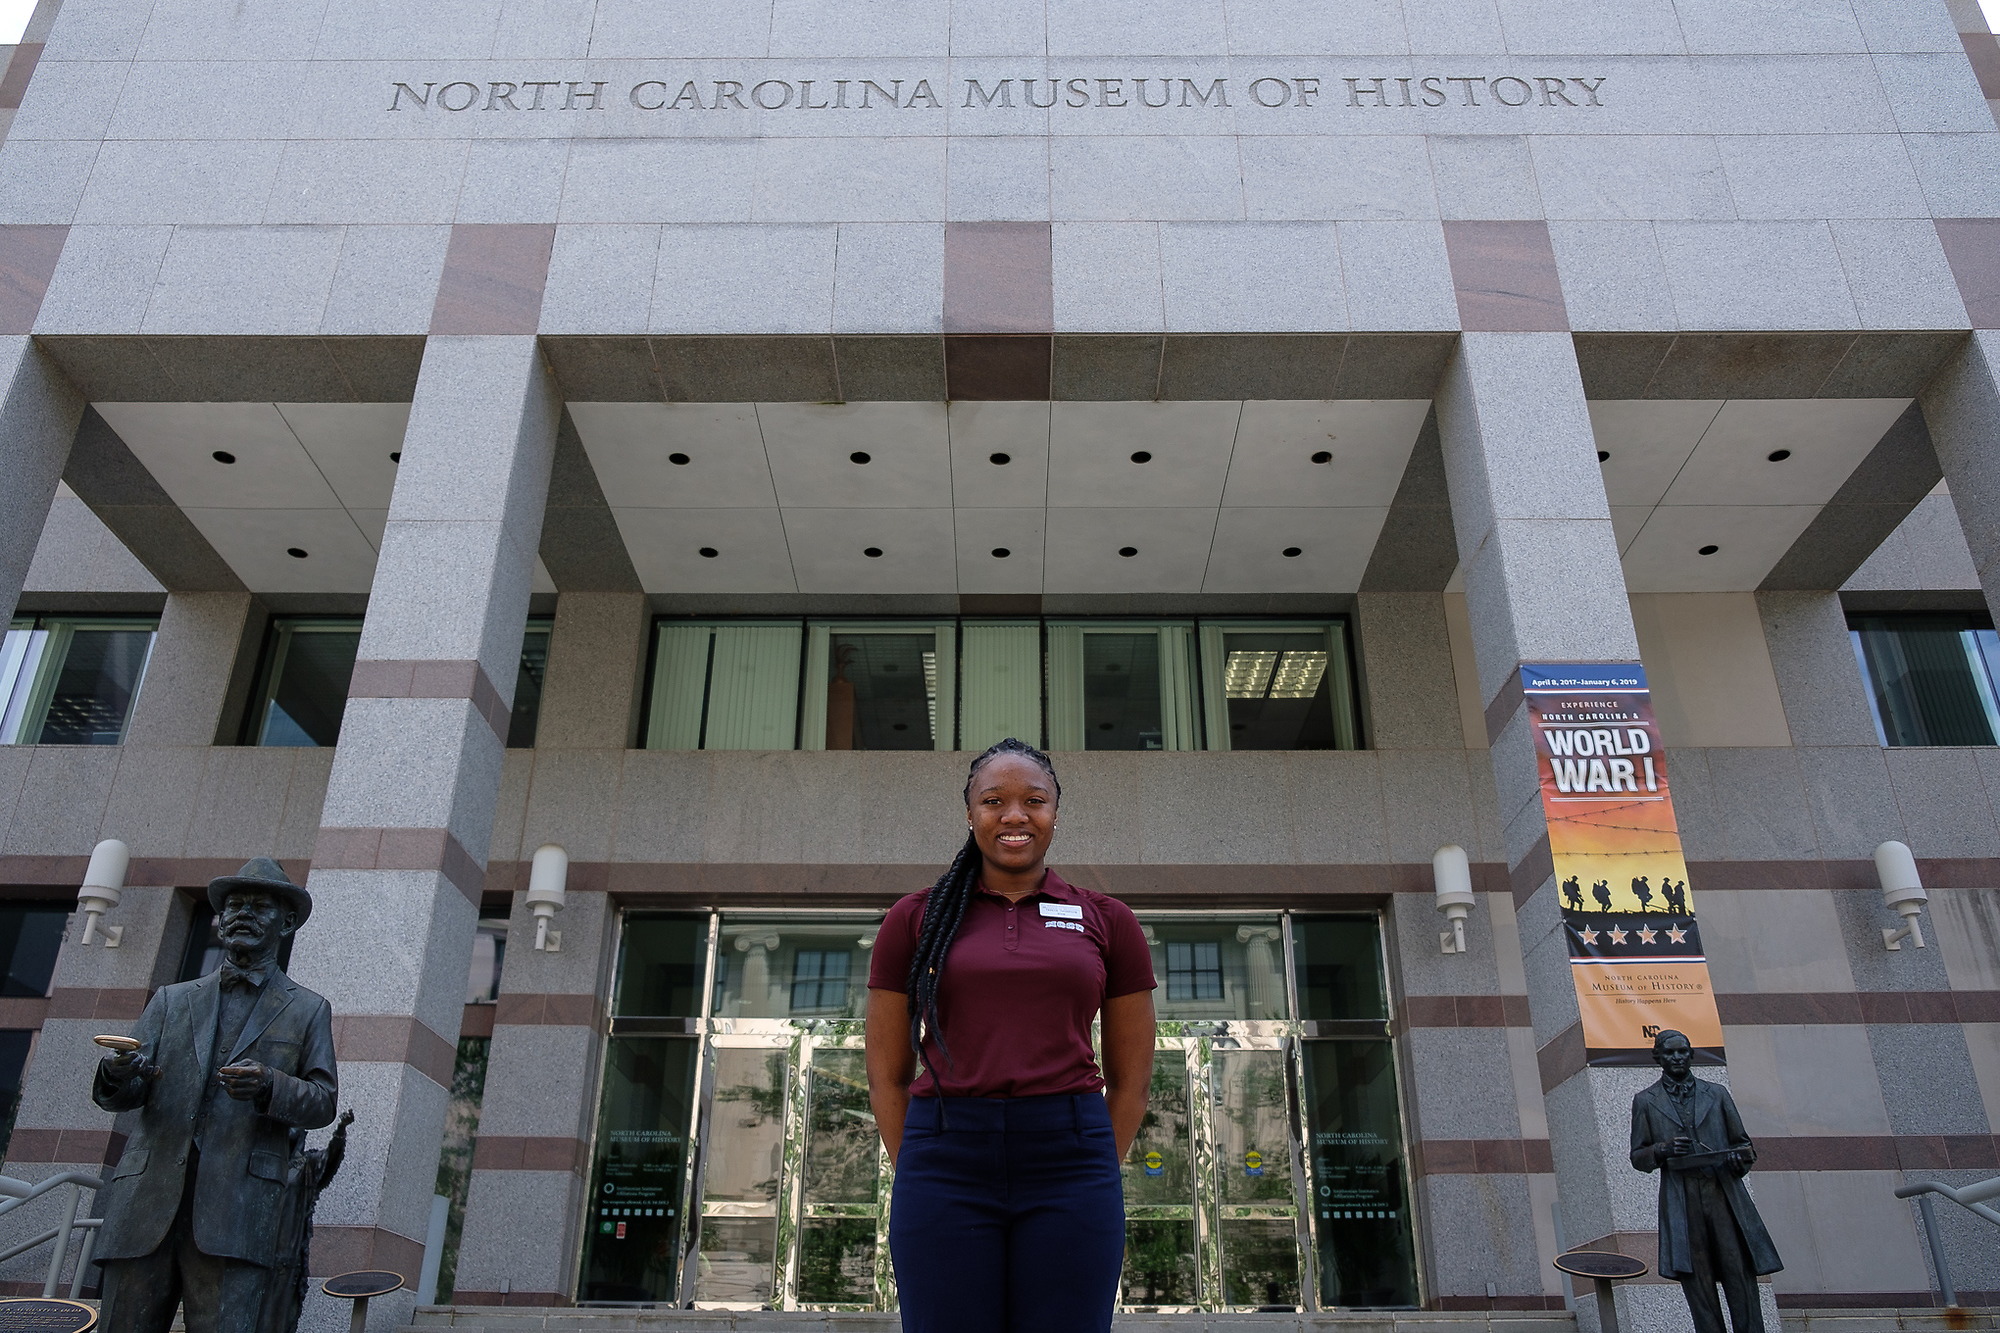 Student is standing in front of History museum